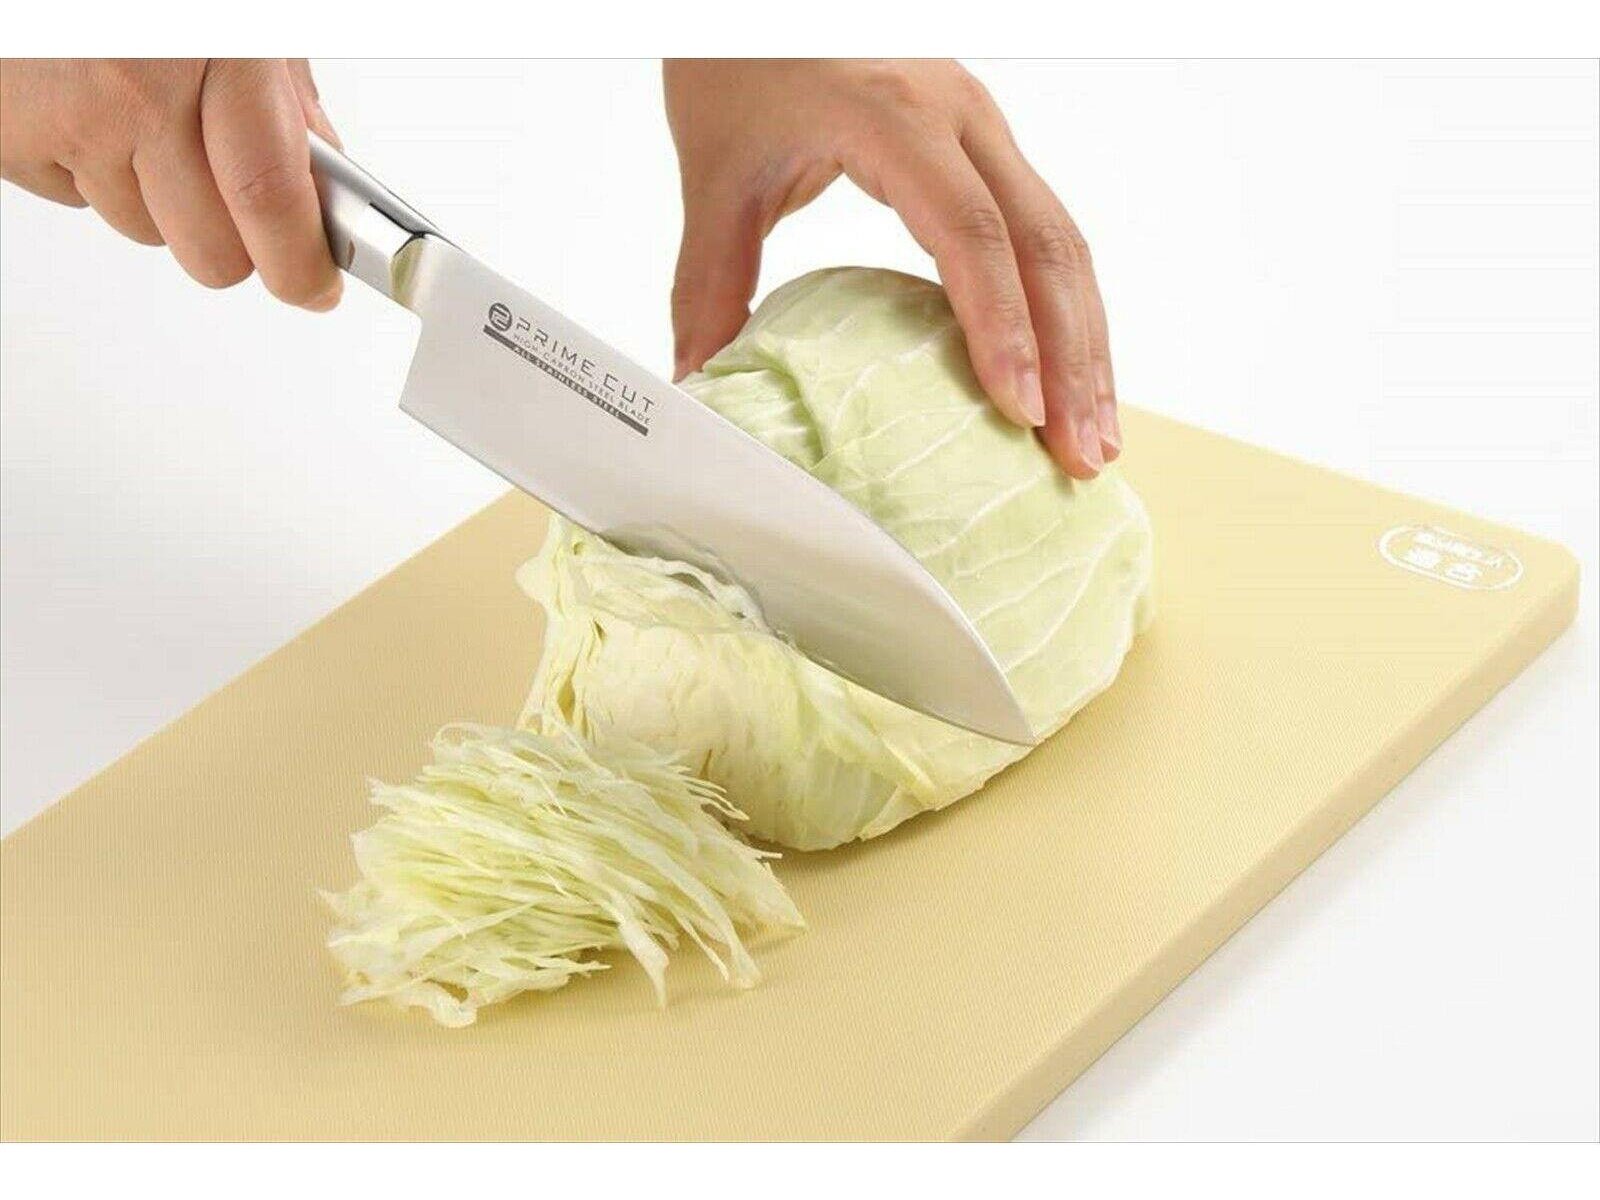 [UNIQUS] Roomez Antimicrobial Cutting Board FDA Approved Safety Chopping  Board